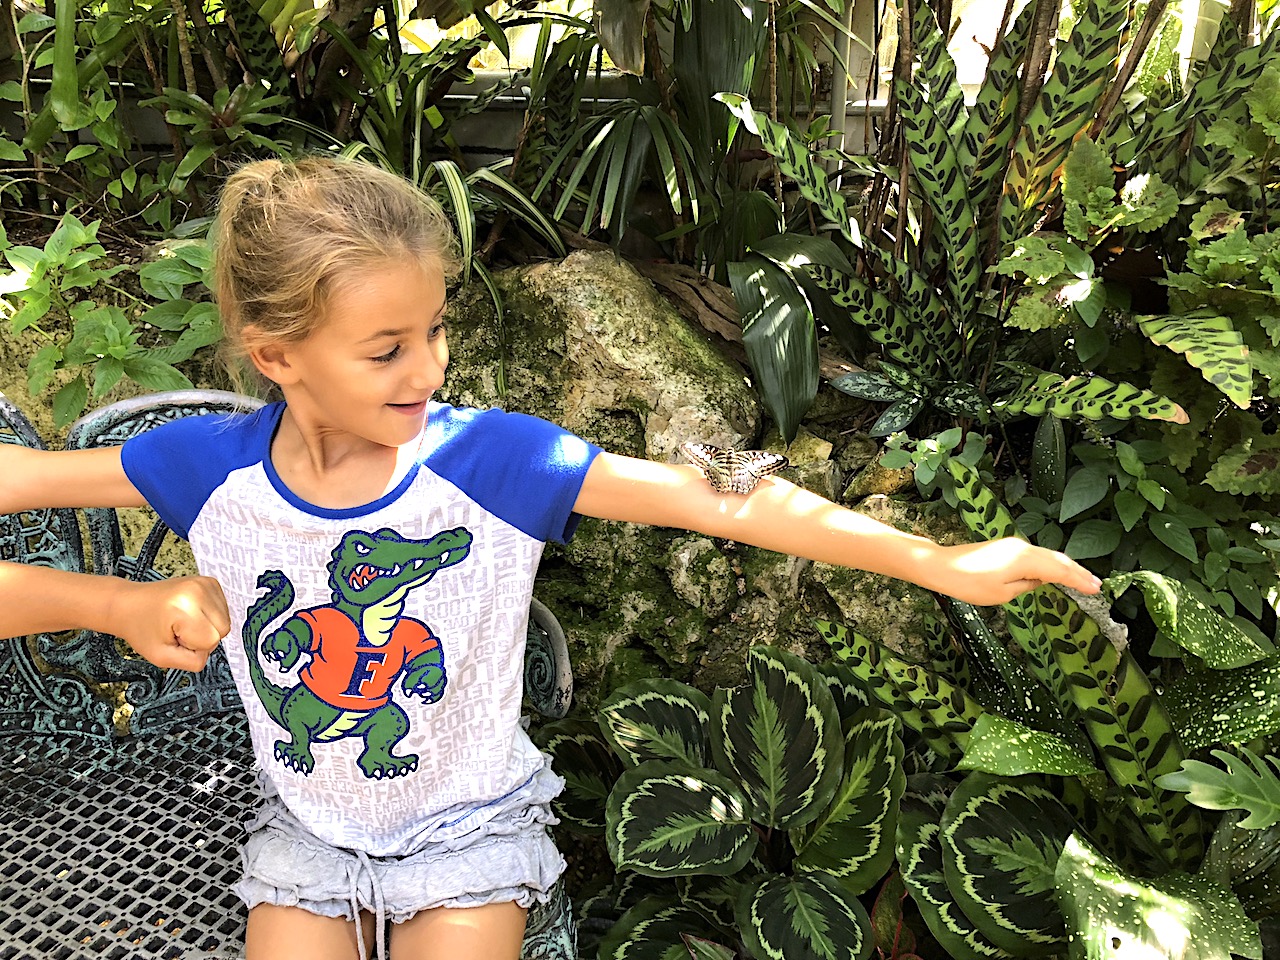 Butterfly Rainforest - 2-day itinerary for families in Gainesville, FL #gainesville #florida #tourofflorida #alachuacounty #gainesvilleFL #universityofflorida #UF #gogators #Gainesvillewithkids #gainesvilleitinerary